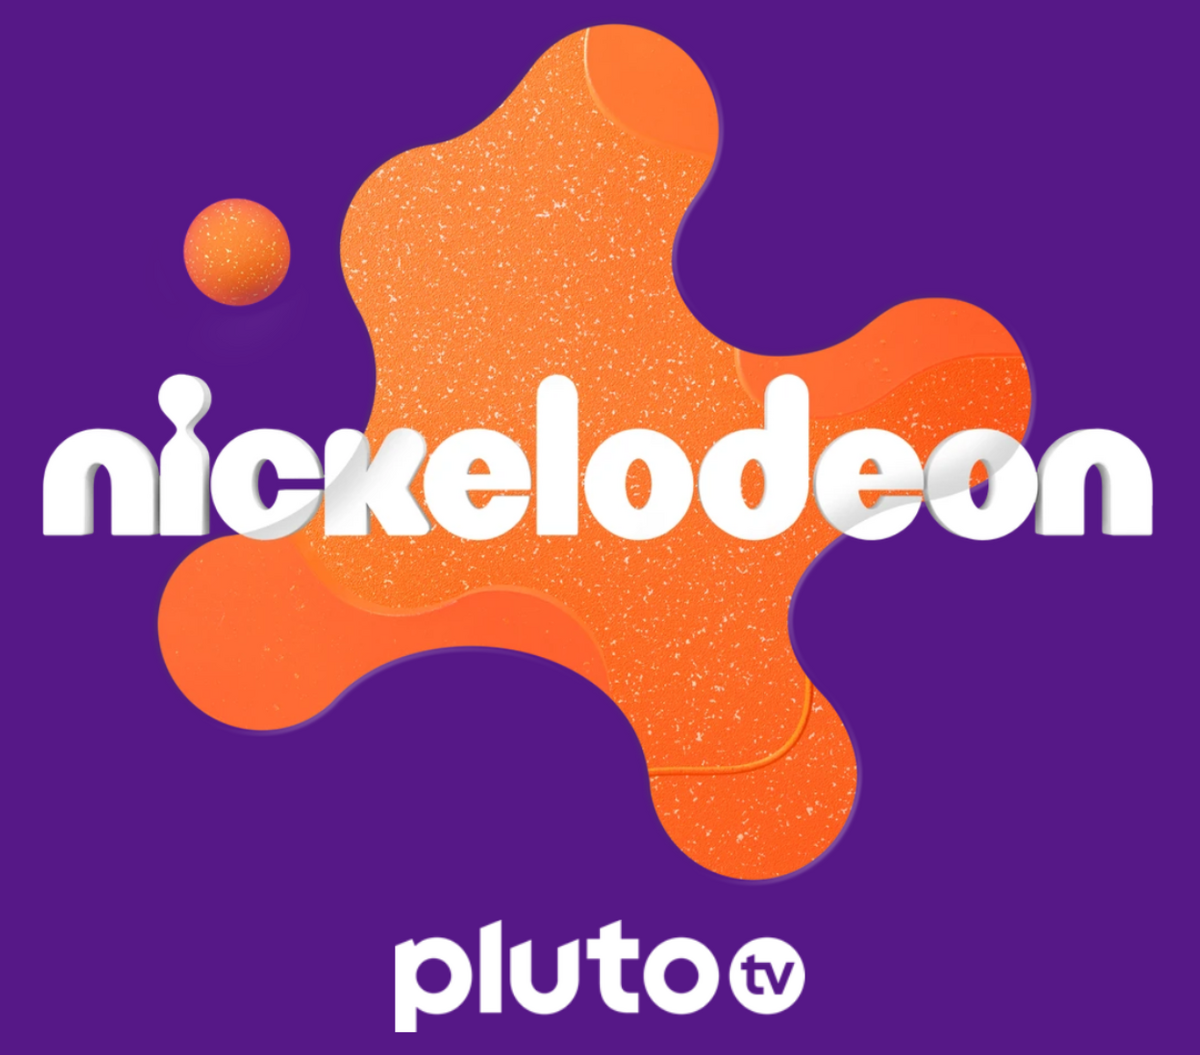 https://static.wikia.nocookie.net/nickelodeon/images/e/e4/Nickplutotvlogo2023.png/revision/latest/scale-to-width-down/1200?cb=20240101170832